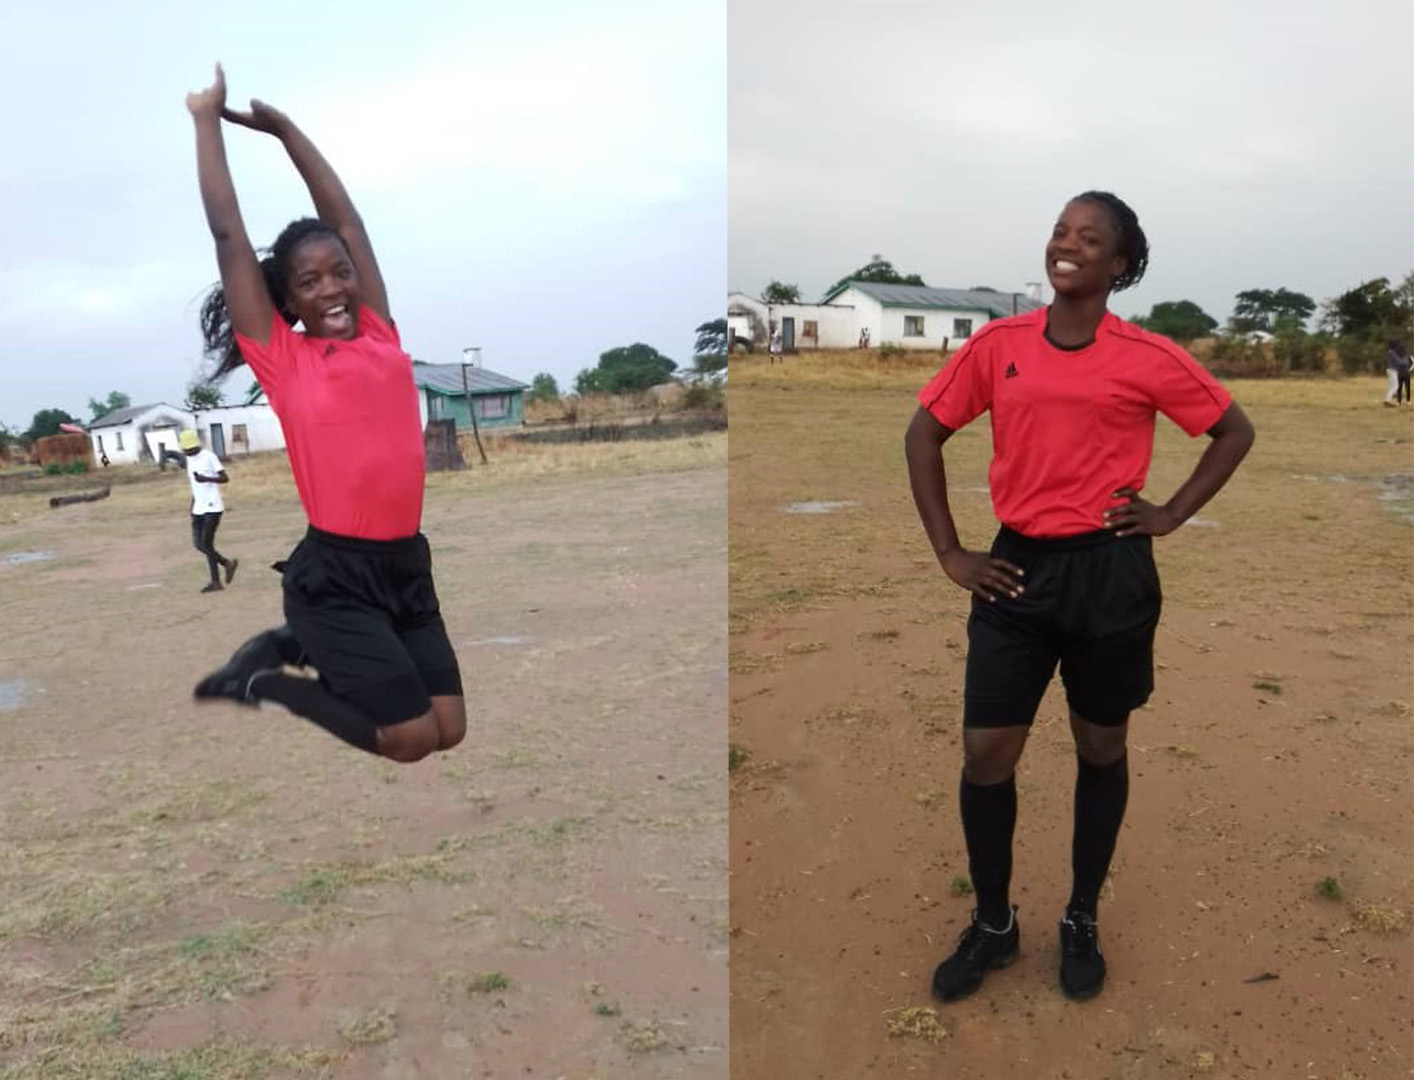 CAMFED Association member and aspiring professional soccer (football) referee Memory standing on the pitch in referee uniform for a photograph in Zambia.